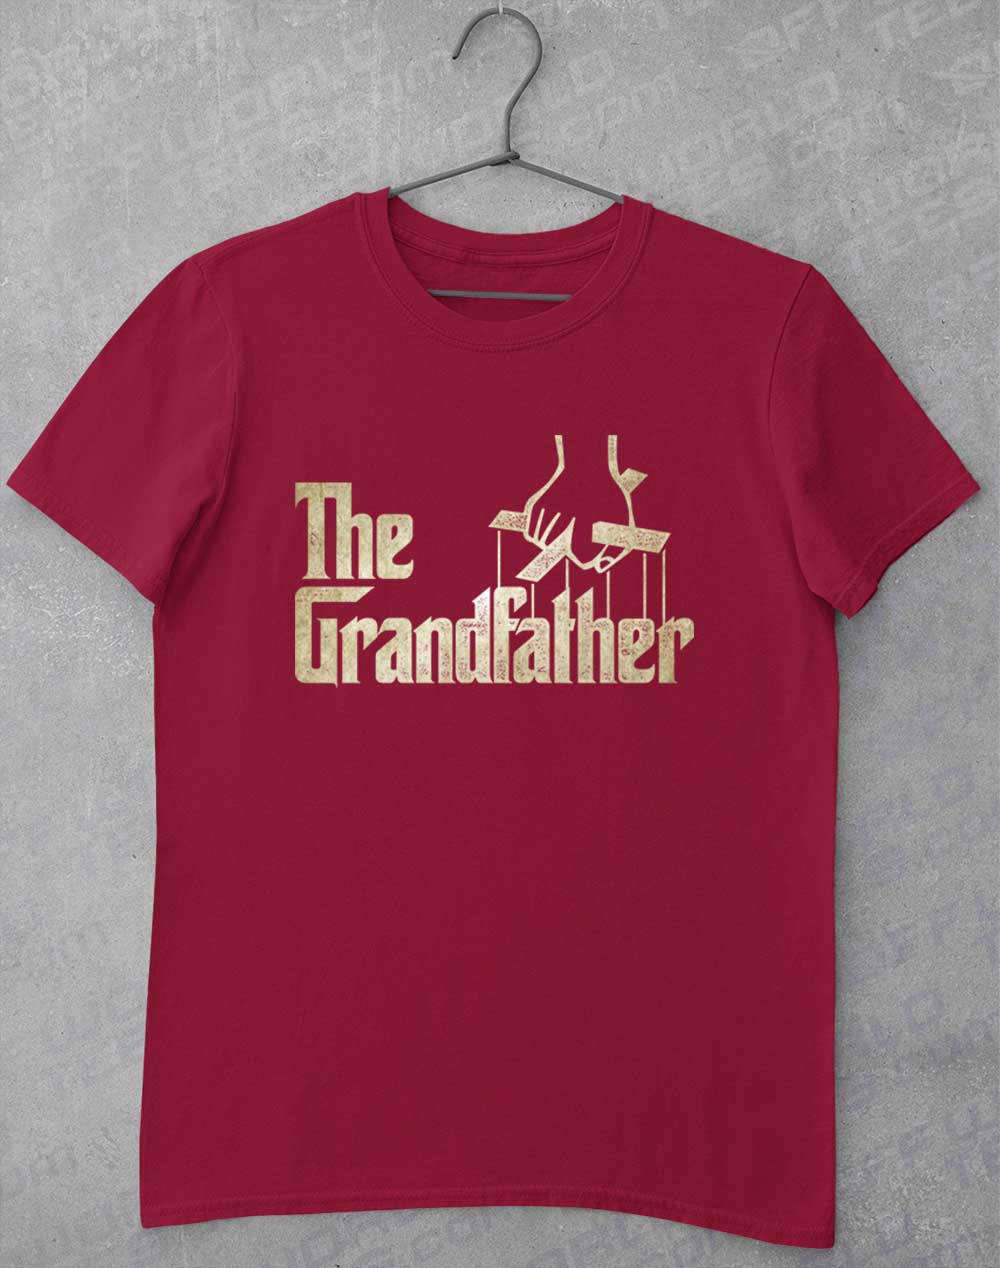 Cardinal Red - The Grandfather T-Shirt